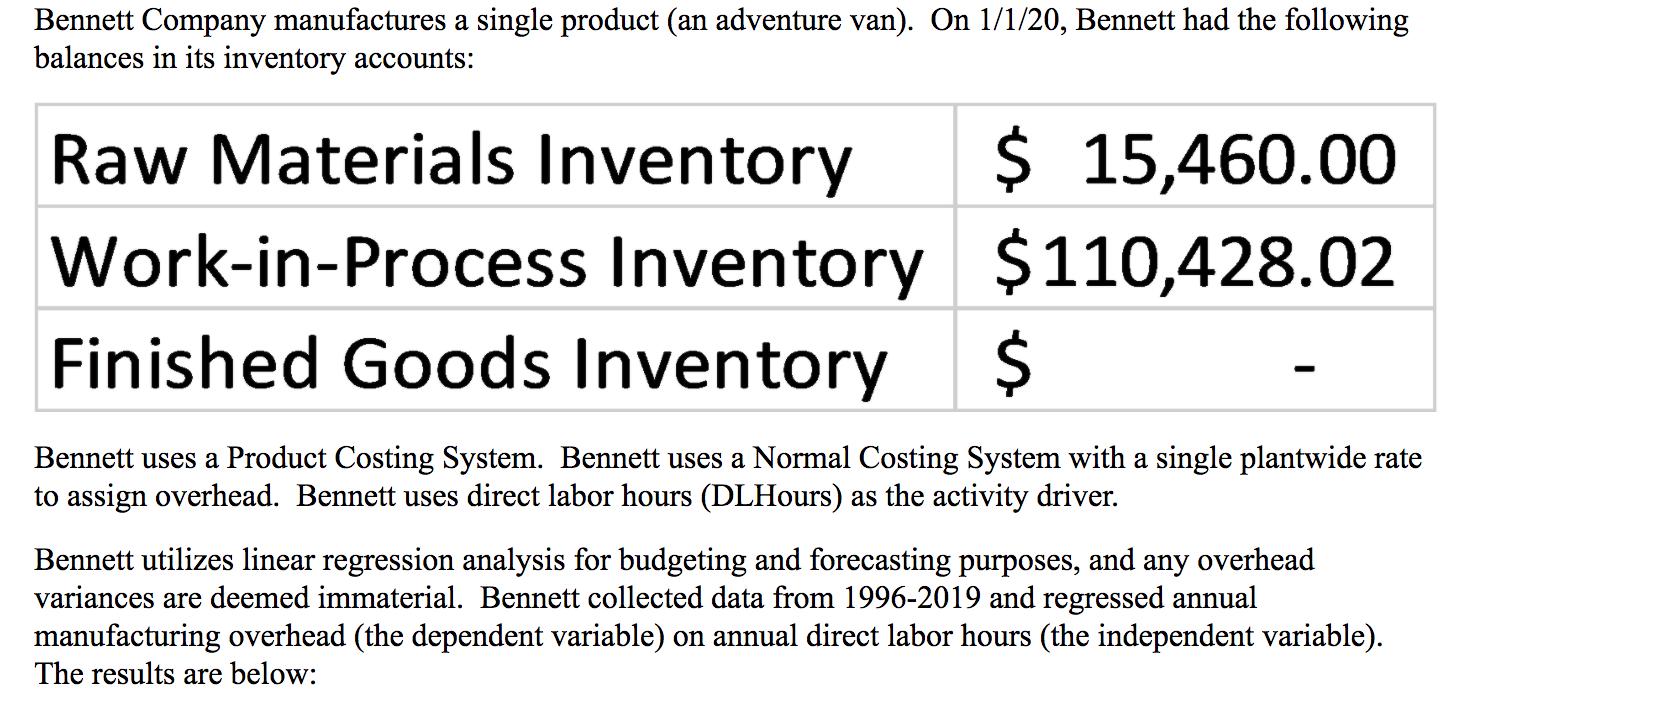 Bennett Company manufactures a single product (an adventure van). On 1/1/20, Bennett had the following balances in its invent